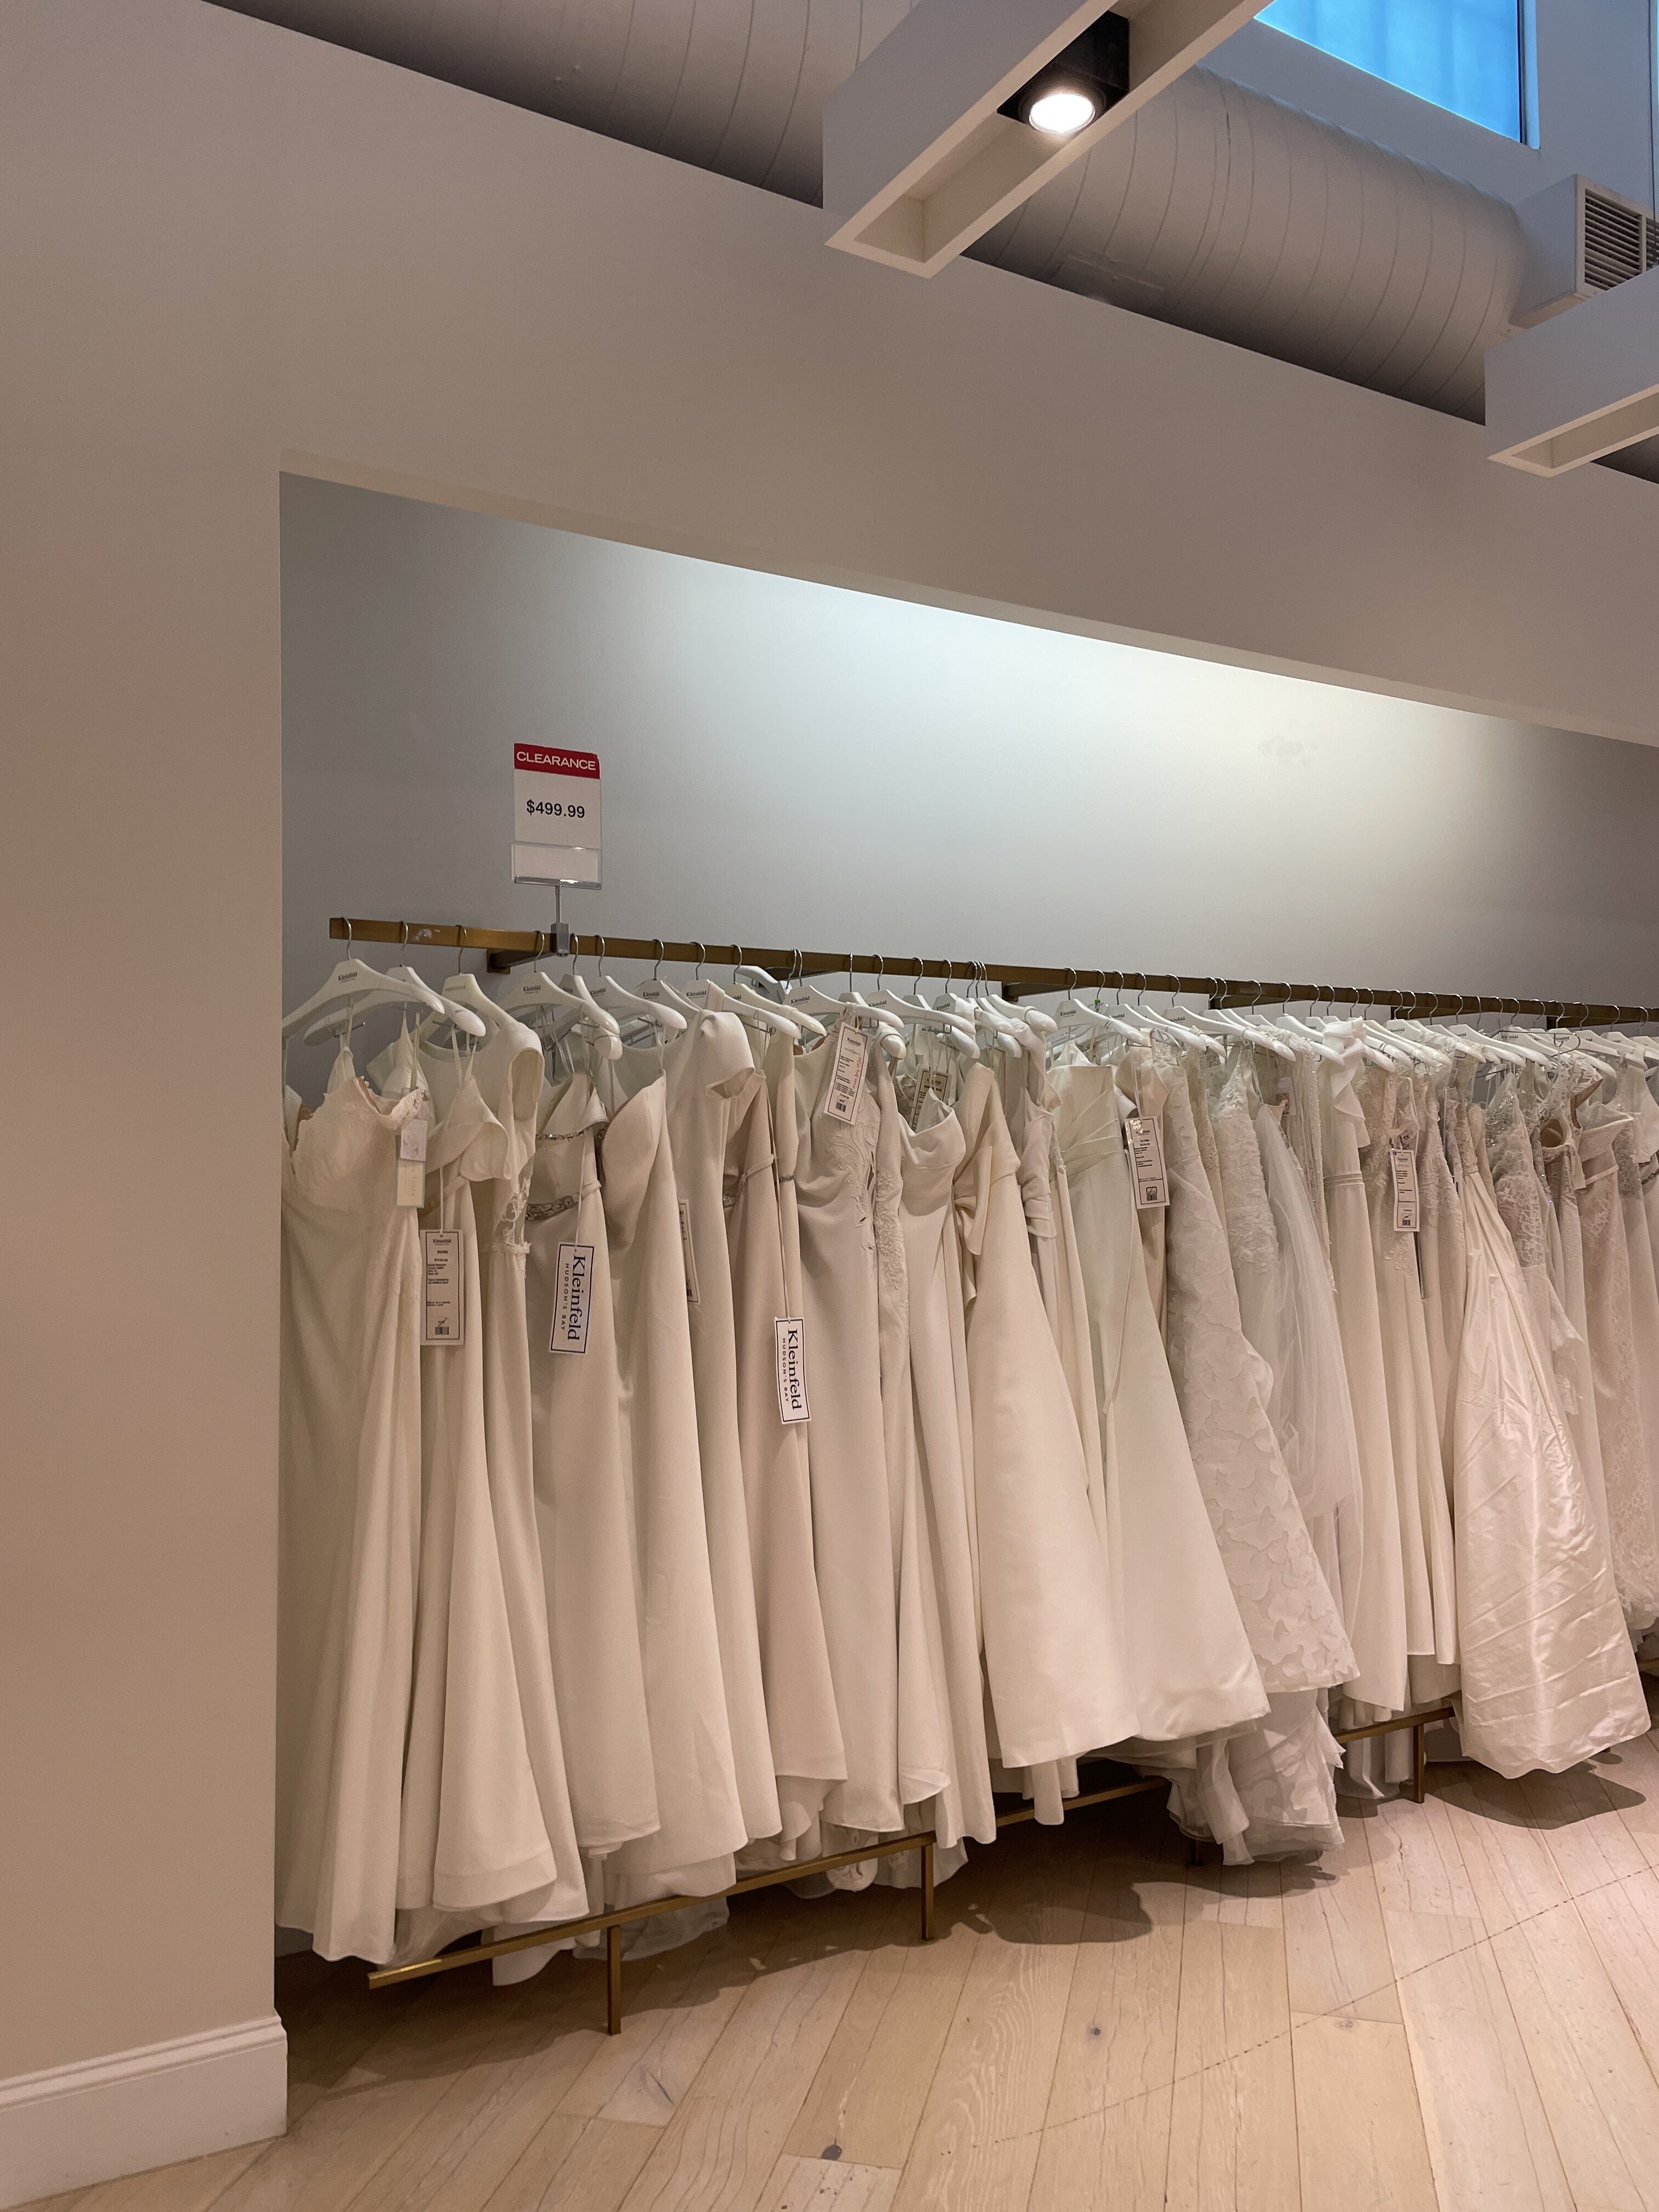 Toronto Wedding Dress Shop Kleinfeld Is Closing At Hudson's Bay & Gowns Are  On Sale From $199 - Narcity